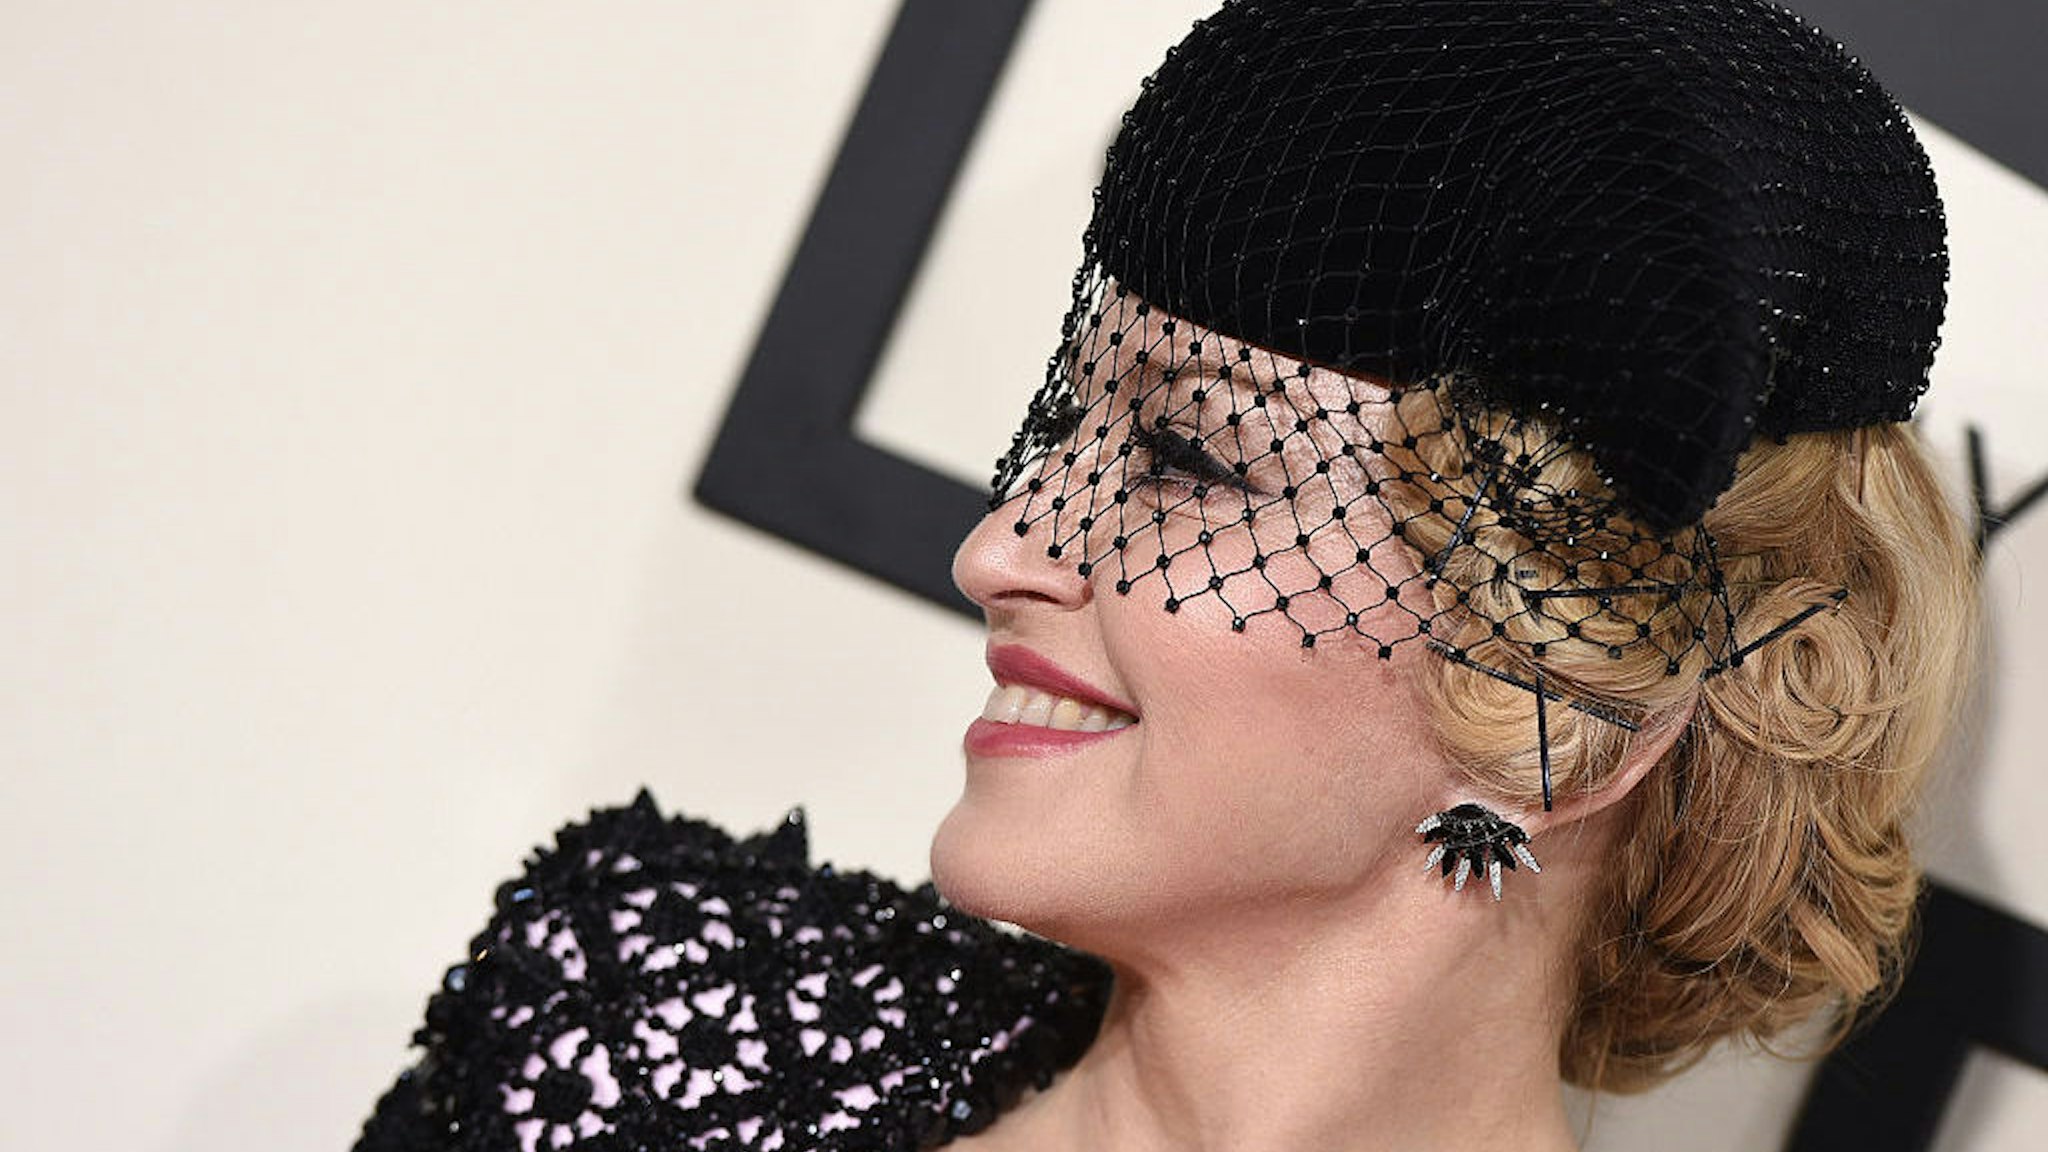 Recording artist Madonna arrives at the 57th Annual GRAMMY Awards at Staples Center on February 8, 2015 in Los Angeles, California. (Photo by Axelle/Bauer-Griffin/FilmMagic)